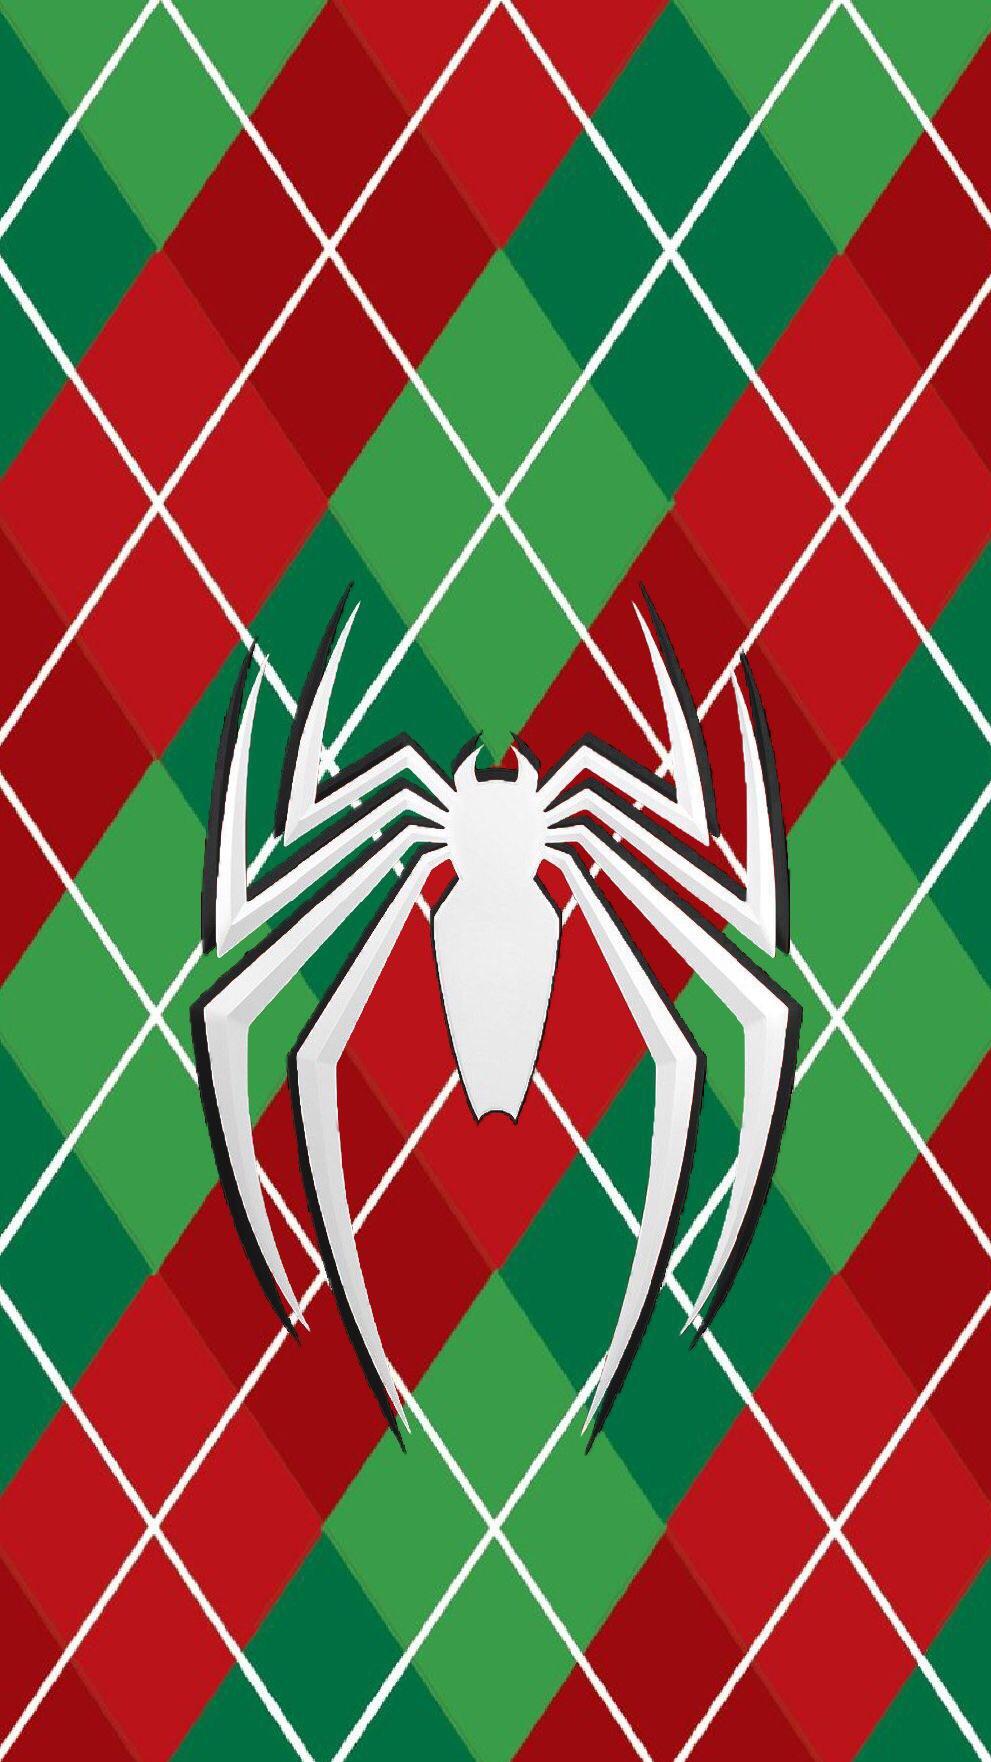 A Spider Man PS4 Christmas Themed Phone Wallpaper I Made. Enjoy